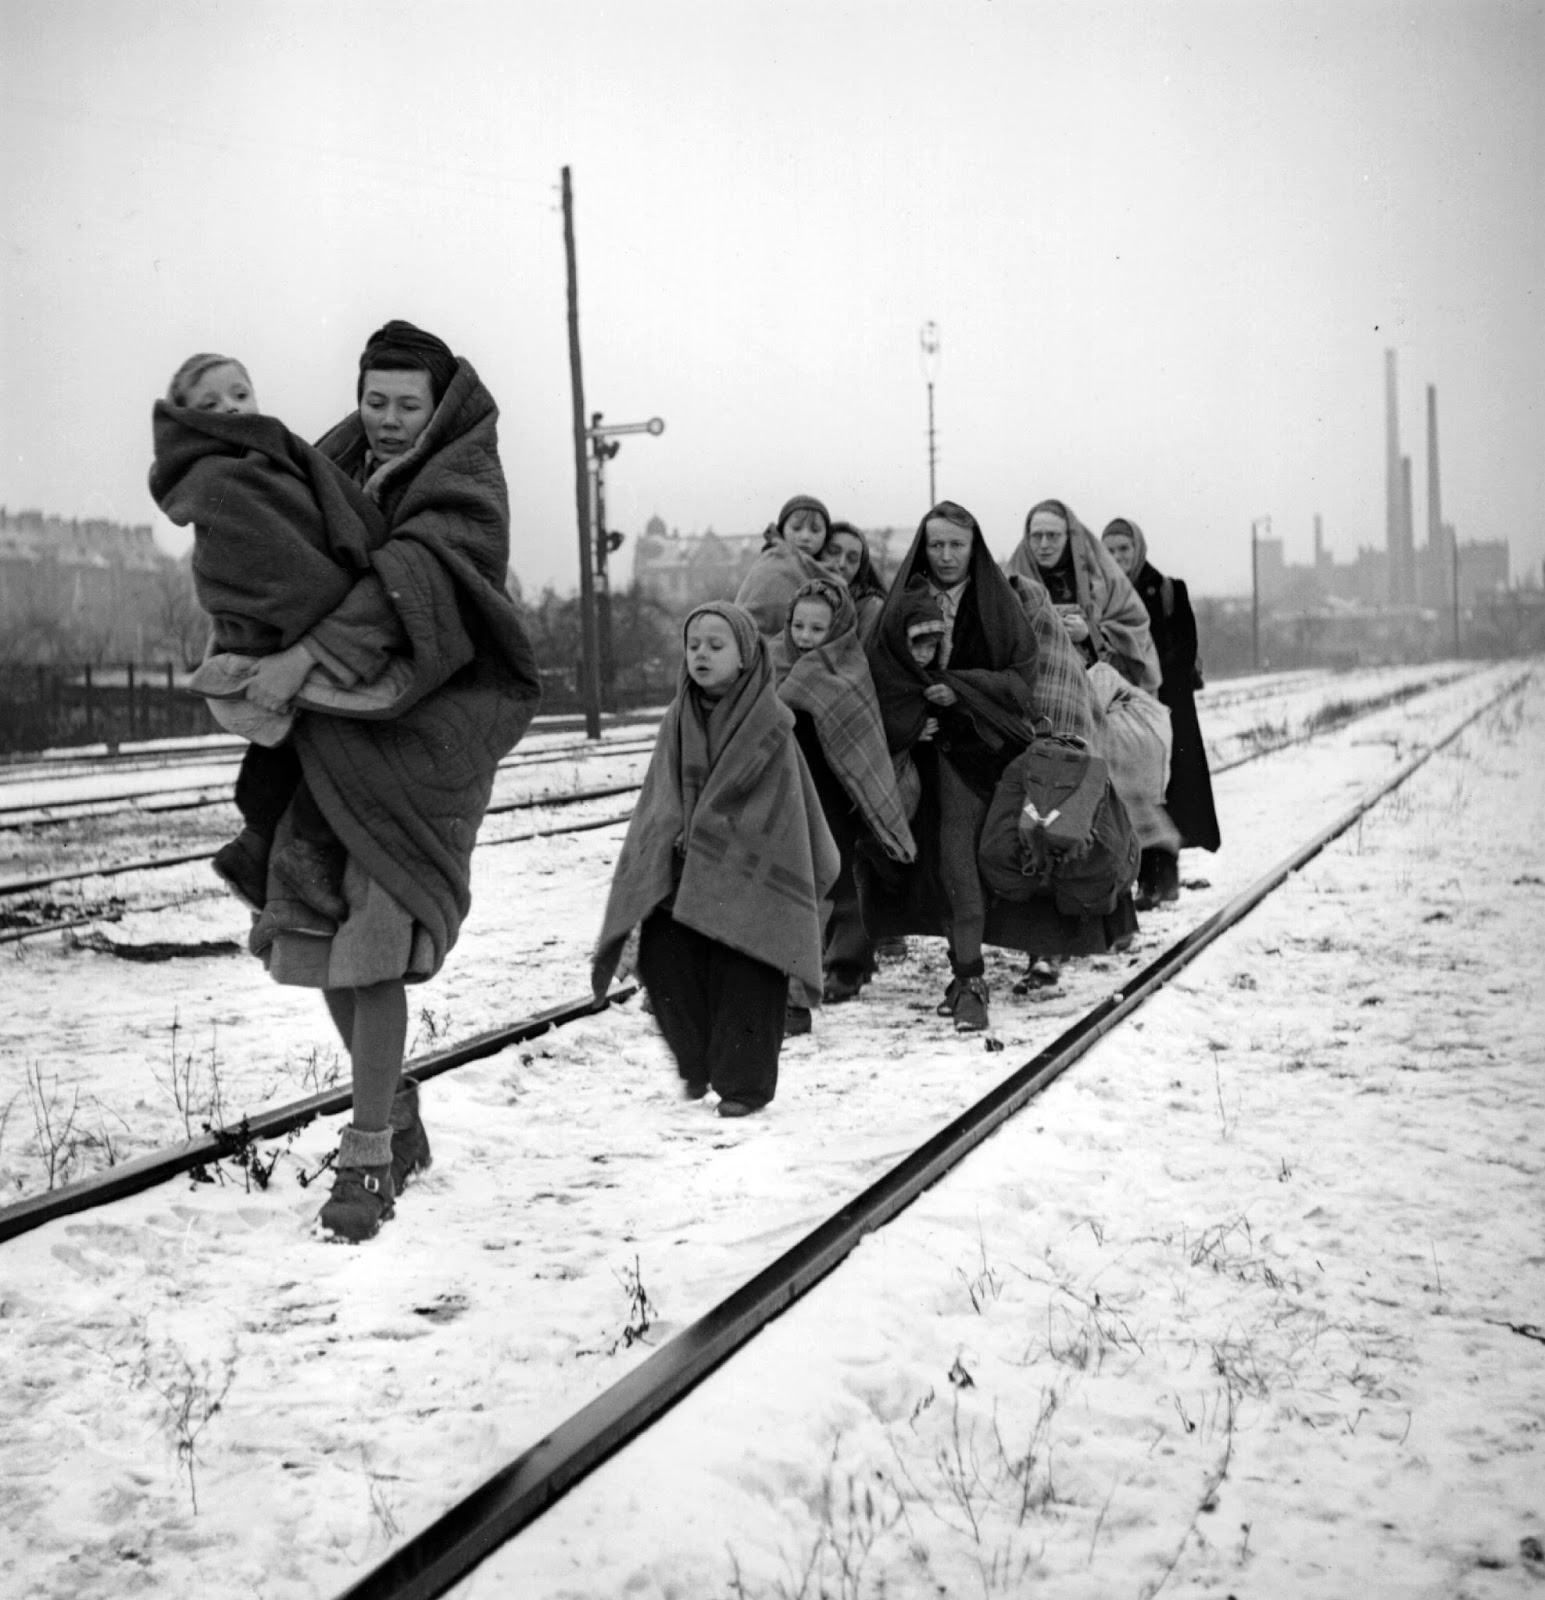 In 1945, a handful of survivors remain of the 150 refugees who left Lodz in Poland two months earlier, headed for Berlin. They follow railway lines in the hope of being picked up by a British train.